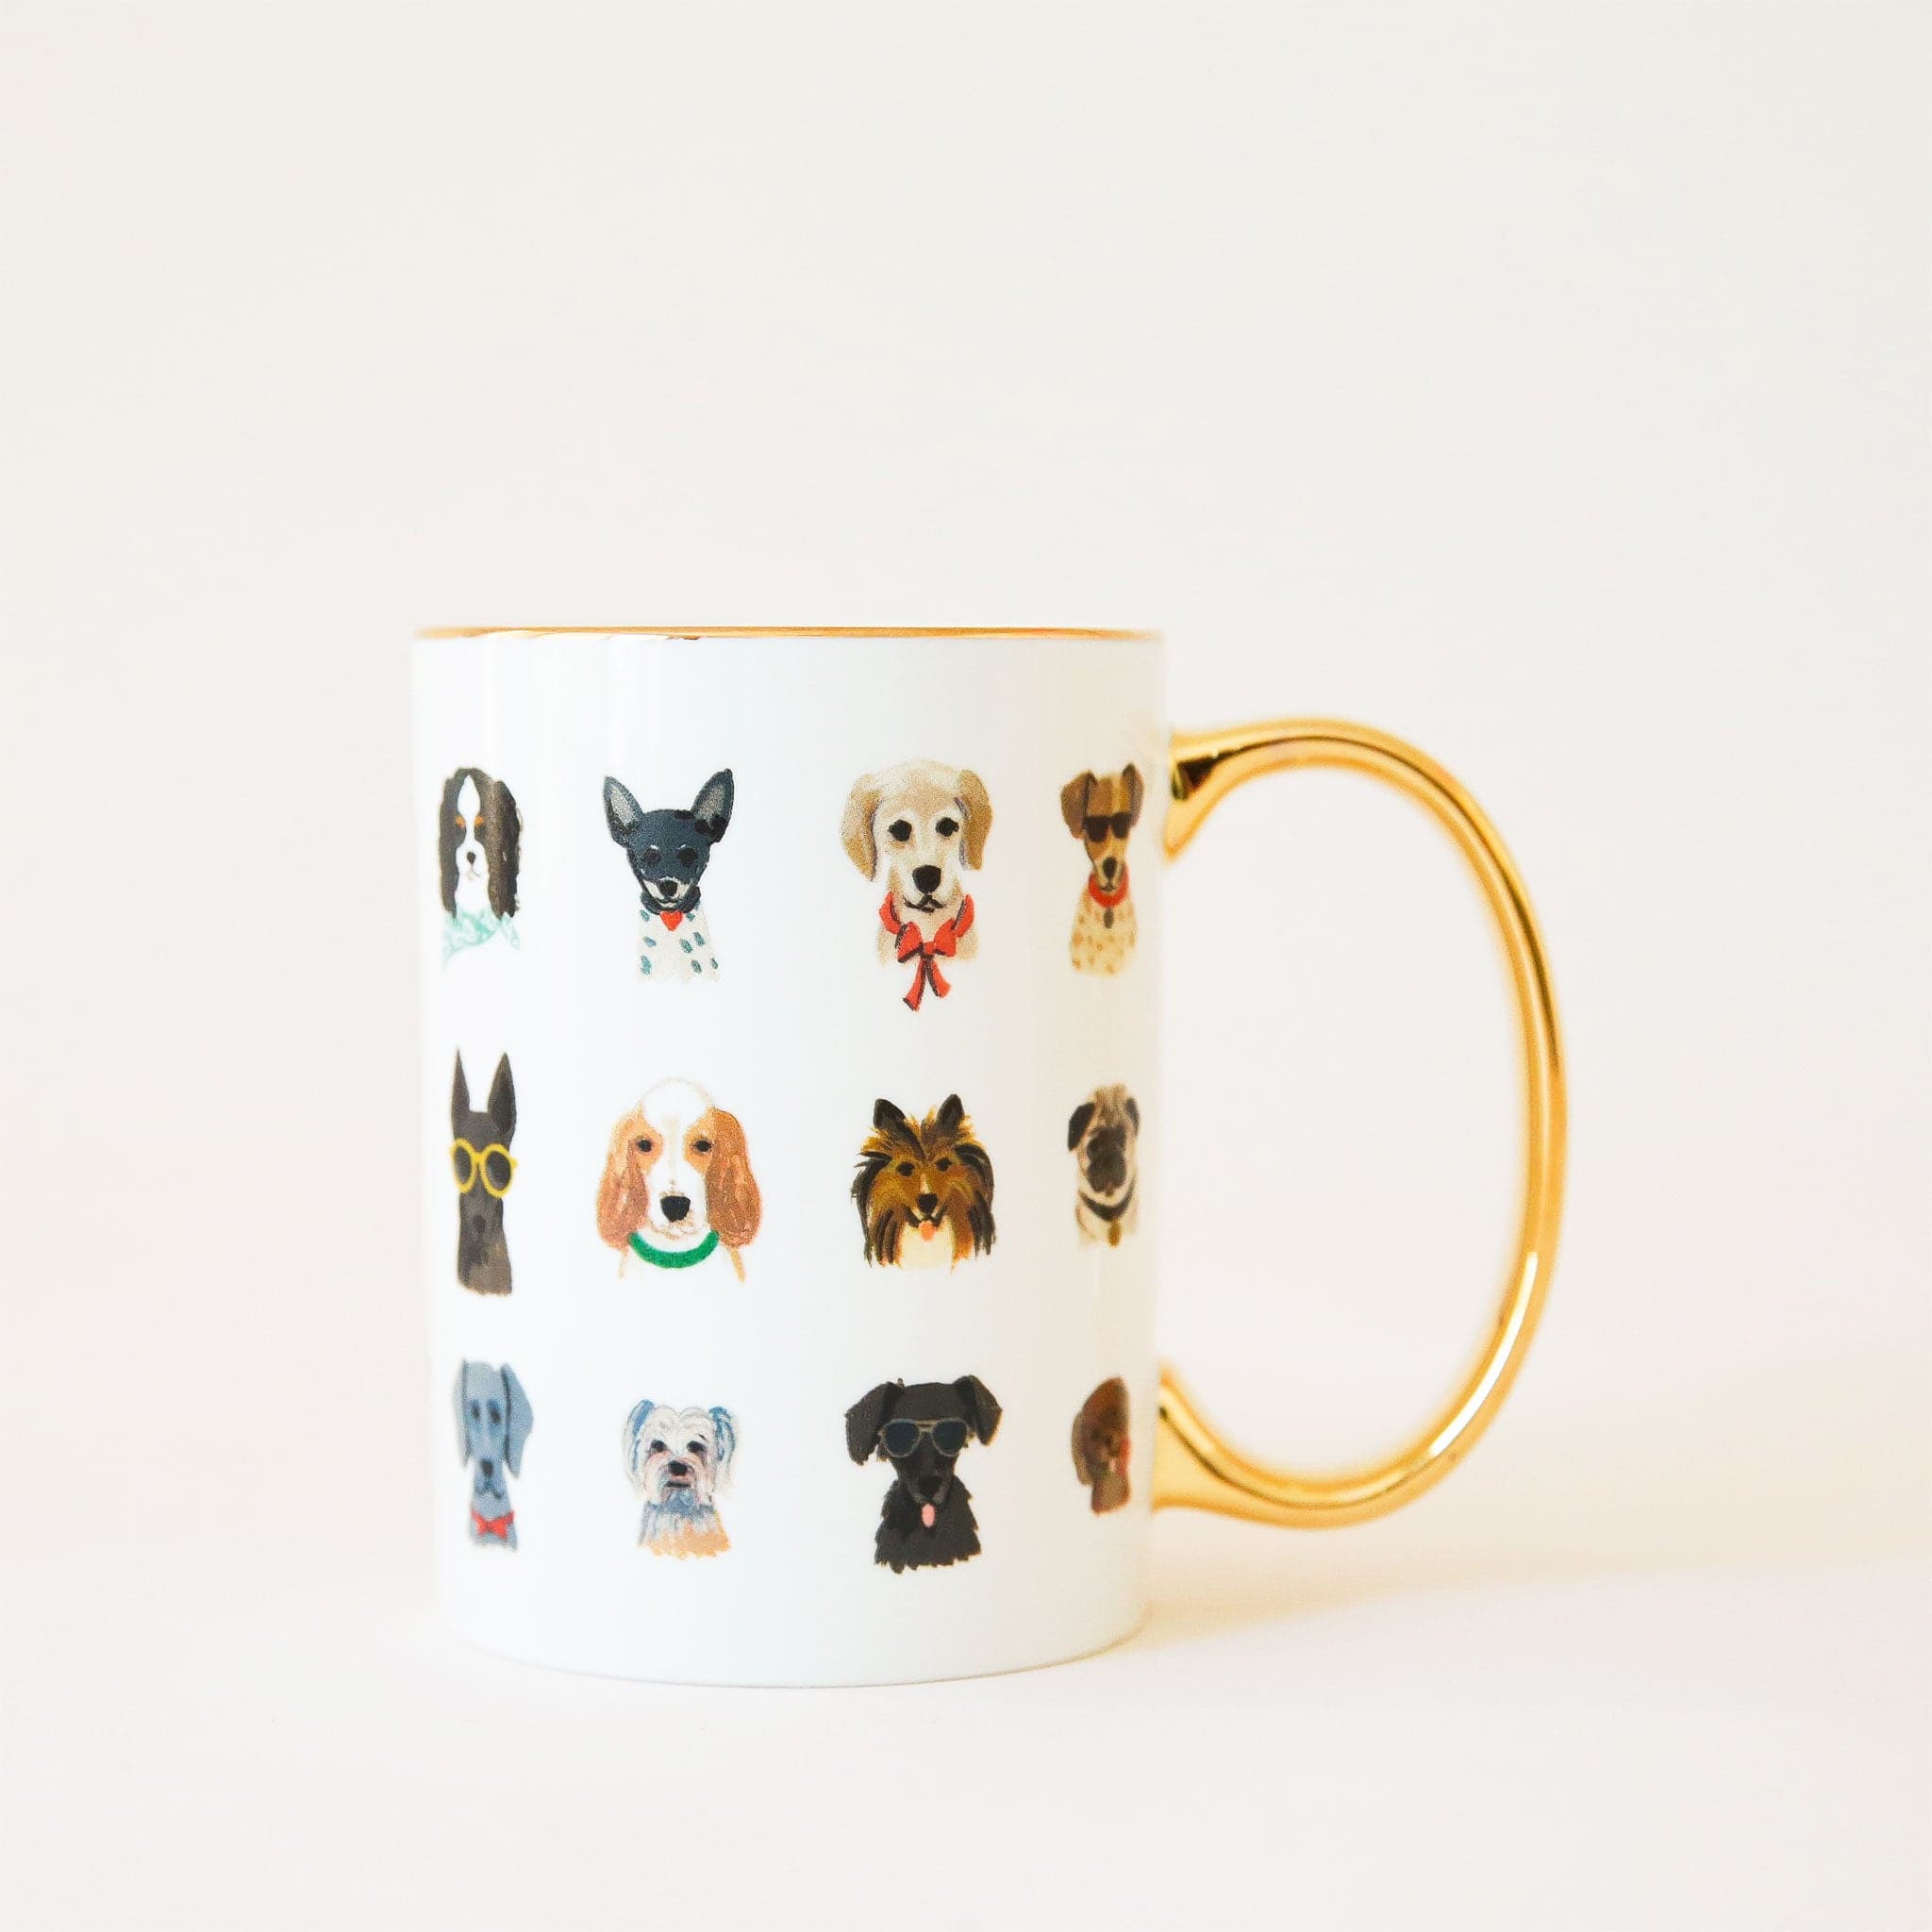 White ceramic mug covered in dog portraits or various breeds dressed in a mix of glasses and bow ties. The mug has a reflective gold handle and rim. 